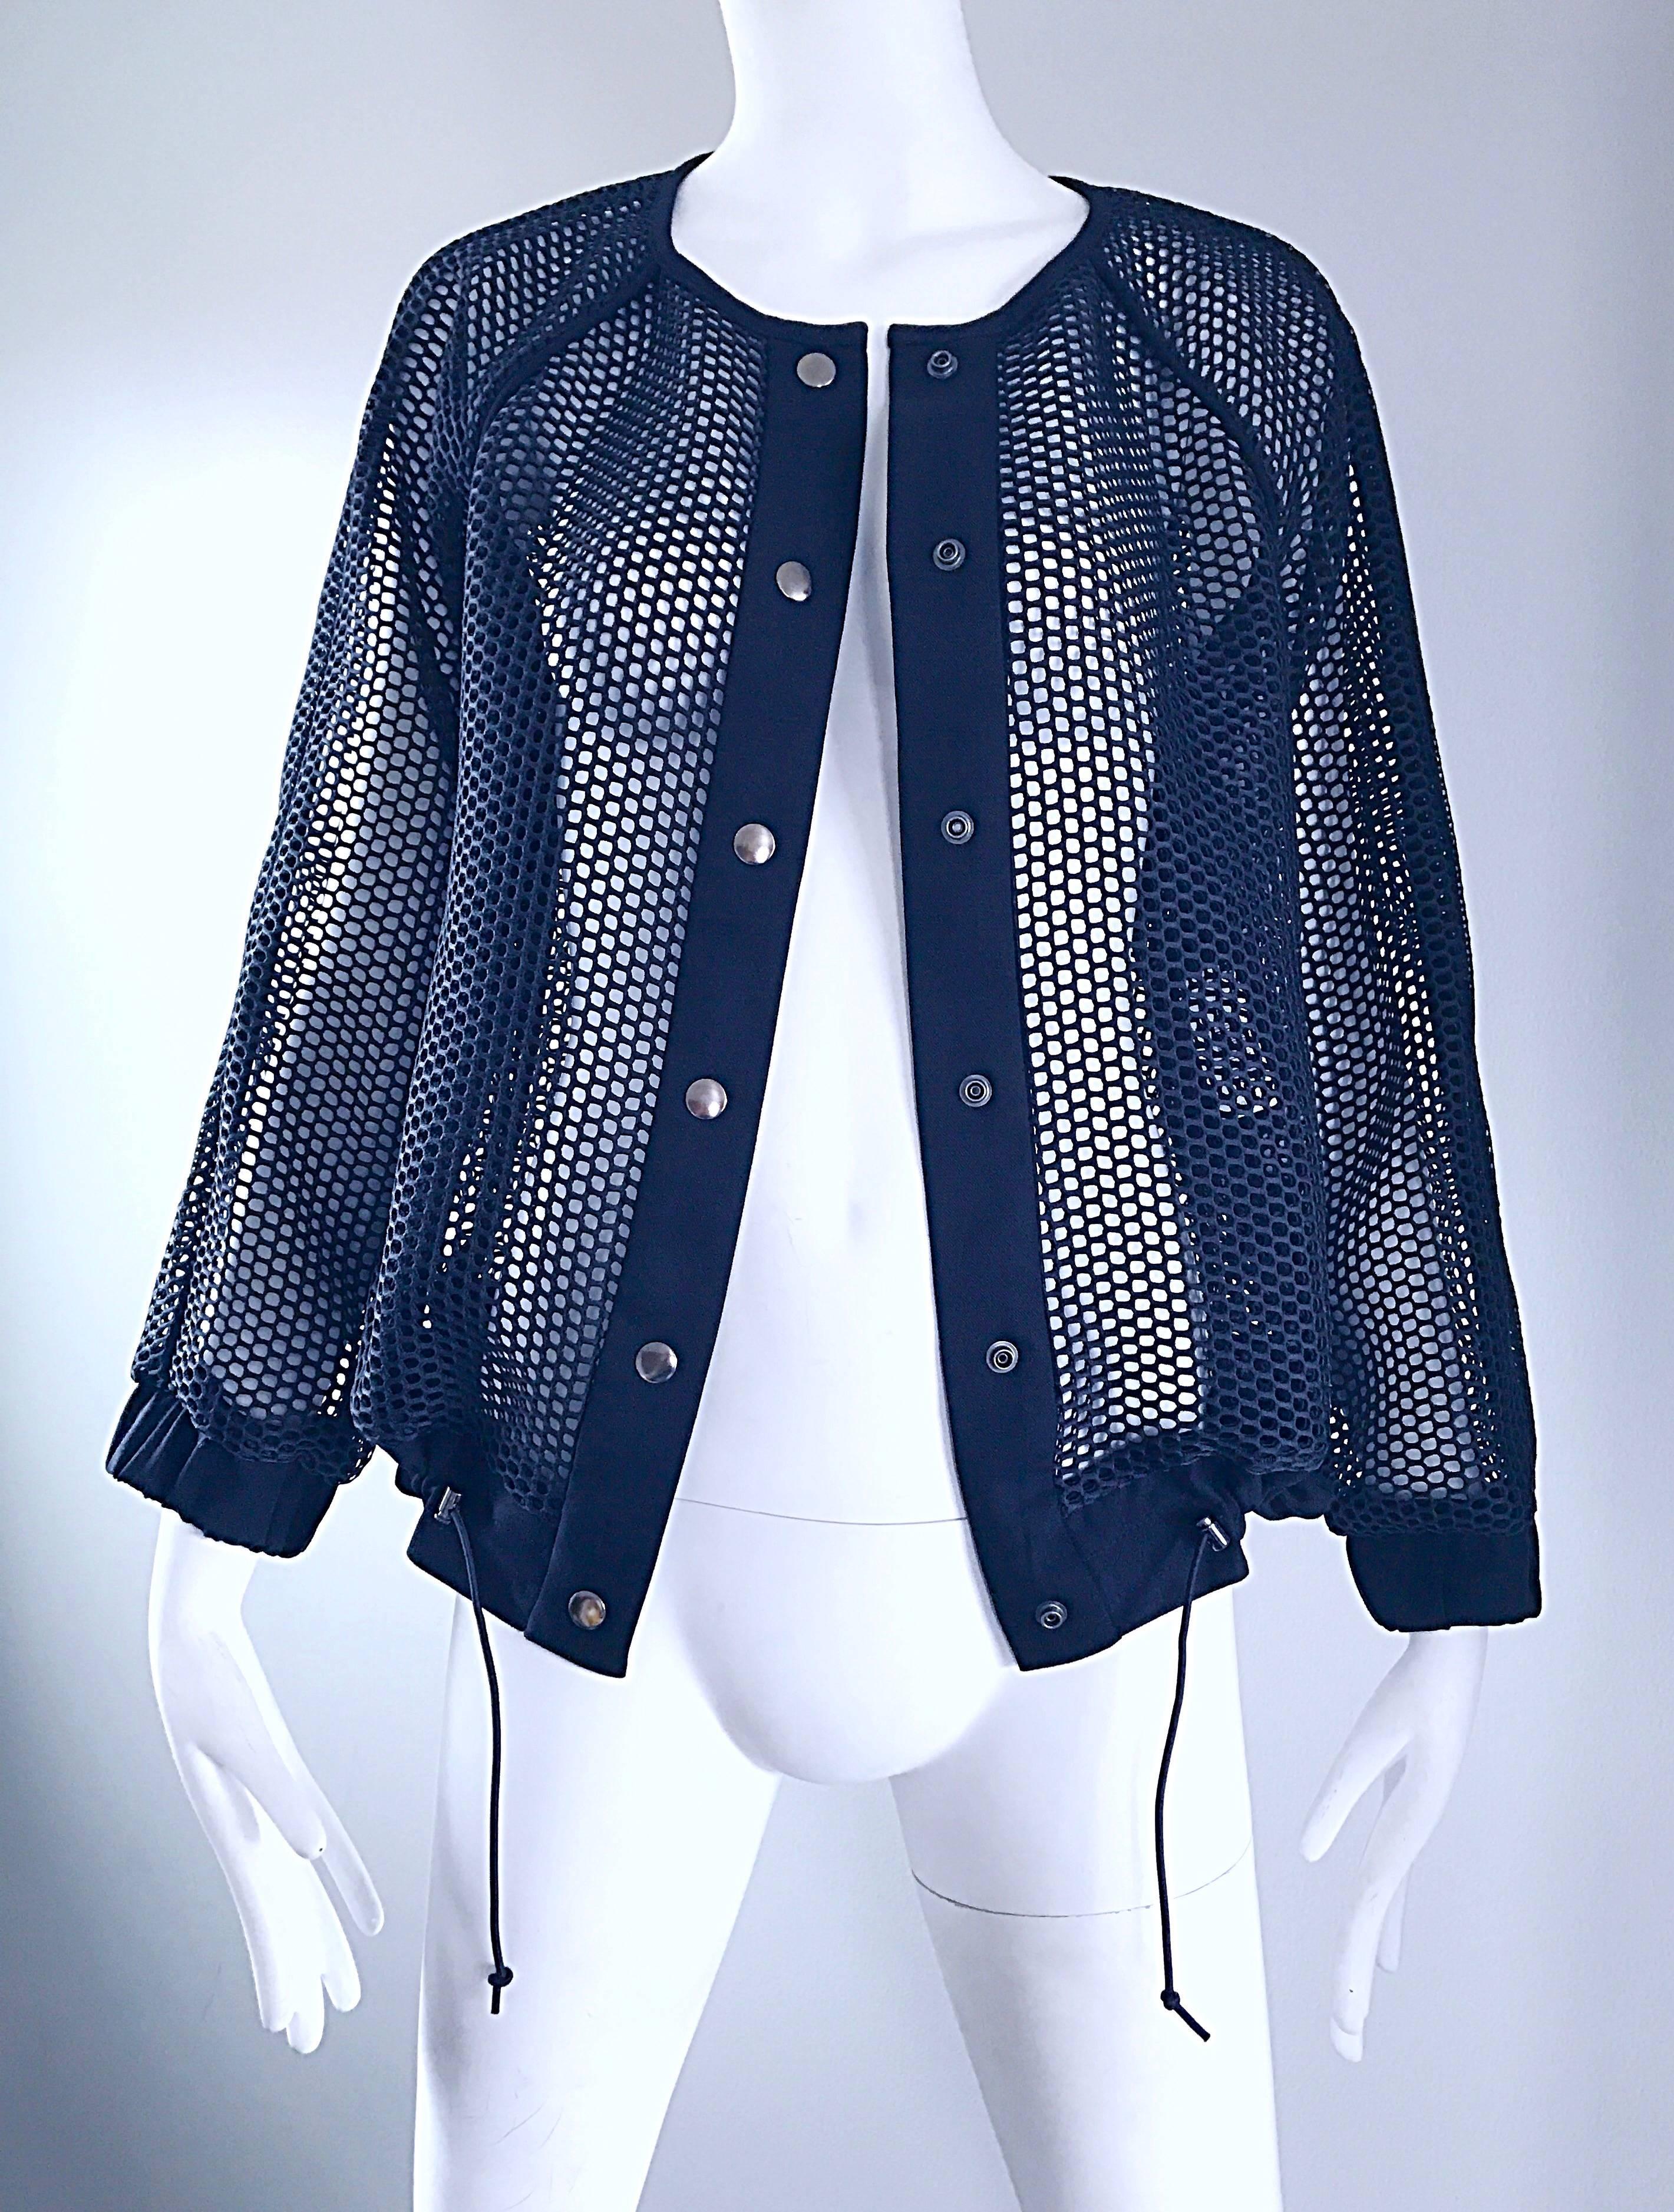 NWT Laver Navy Blue $795 Perforated Cut - Out Net Nautical Jacket Top Cover Up 3